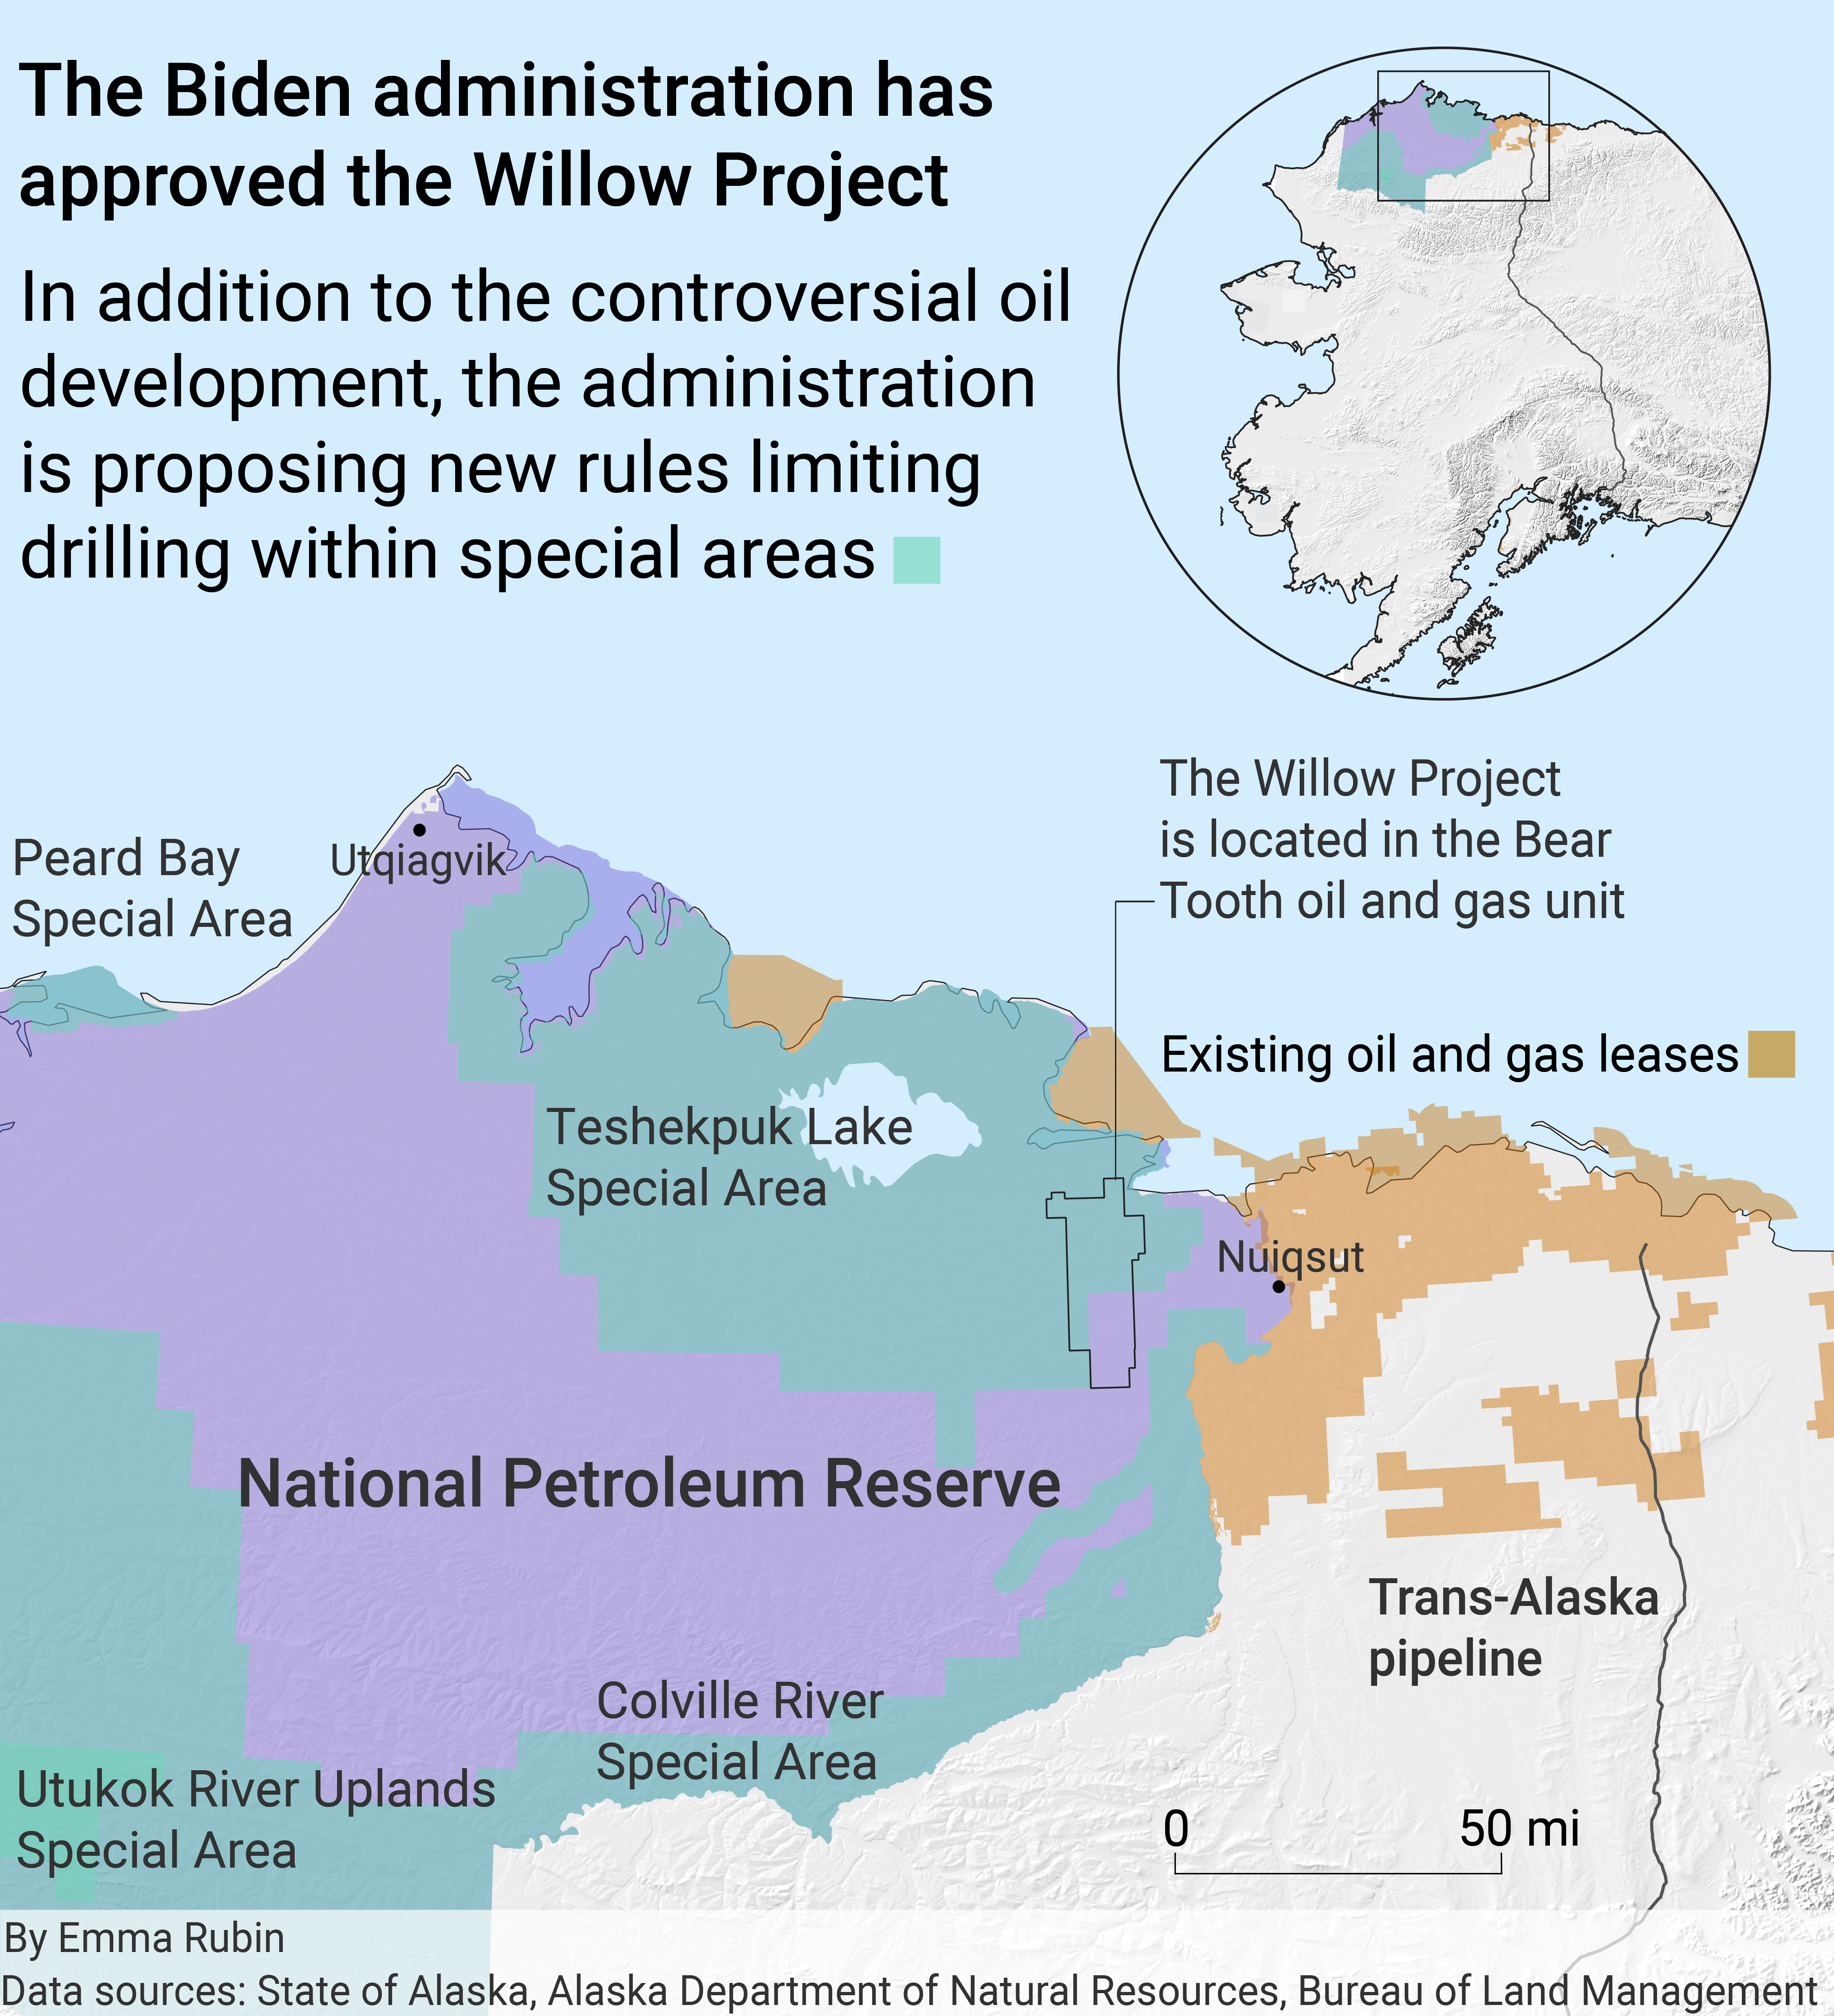 A map of the National Petroleum Reserve with the Willow Project drilling area outlined, and areas receiving new protections color-coded in teal blue